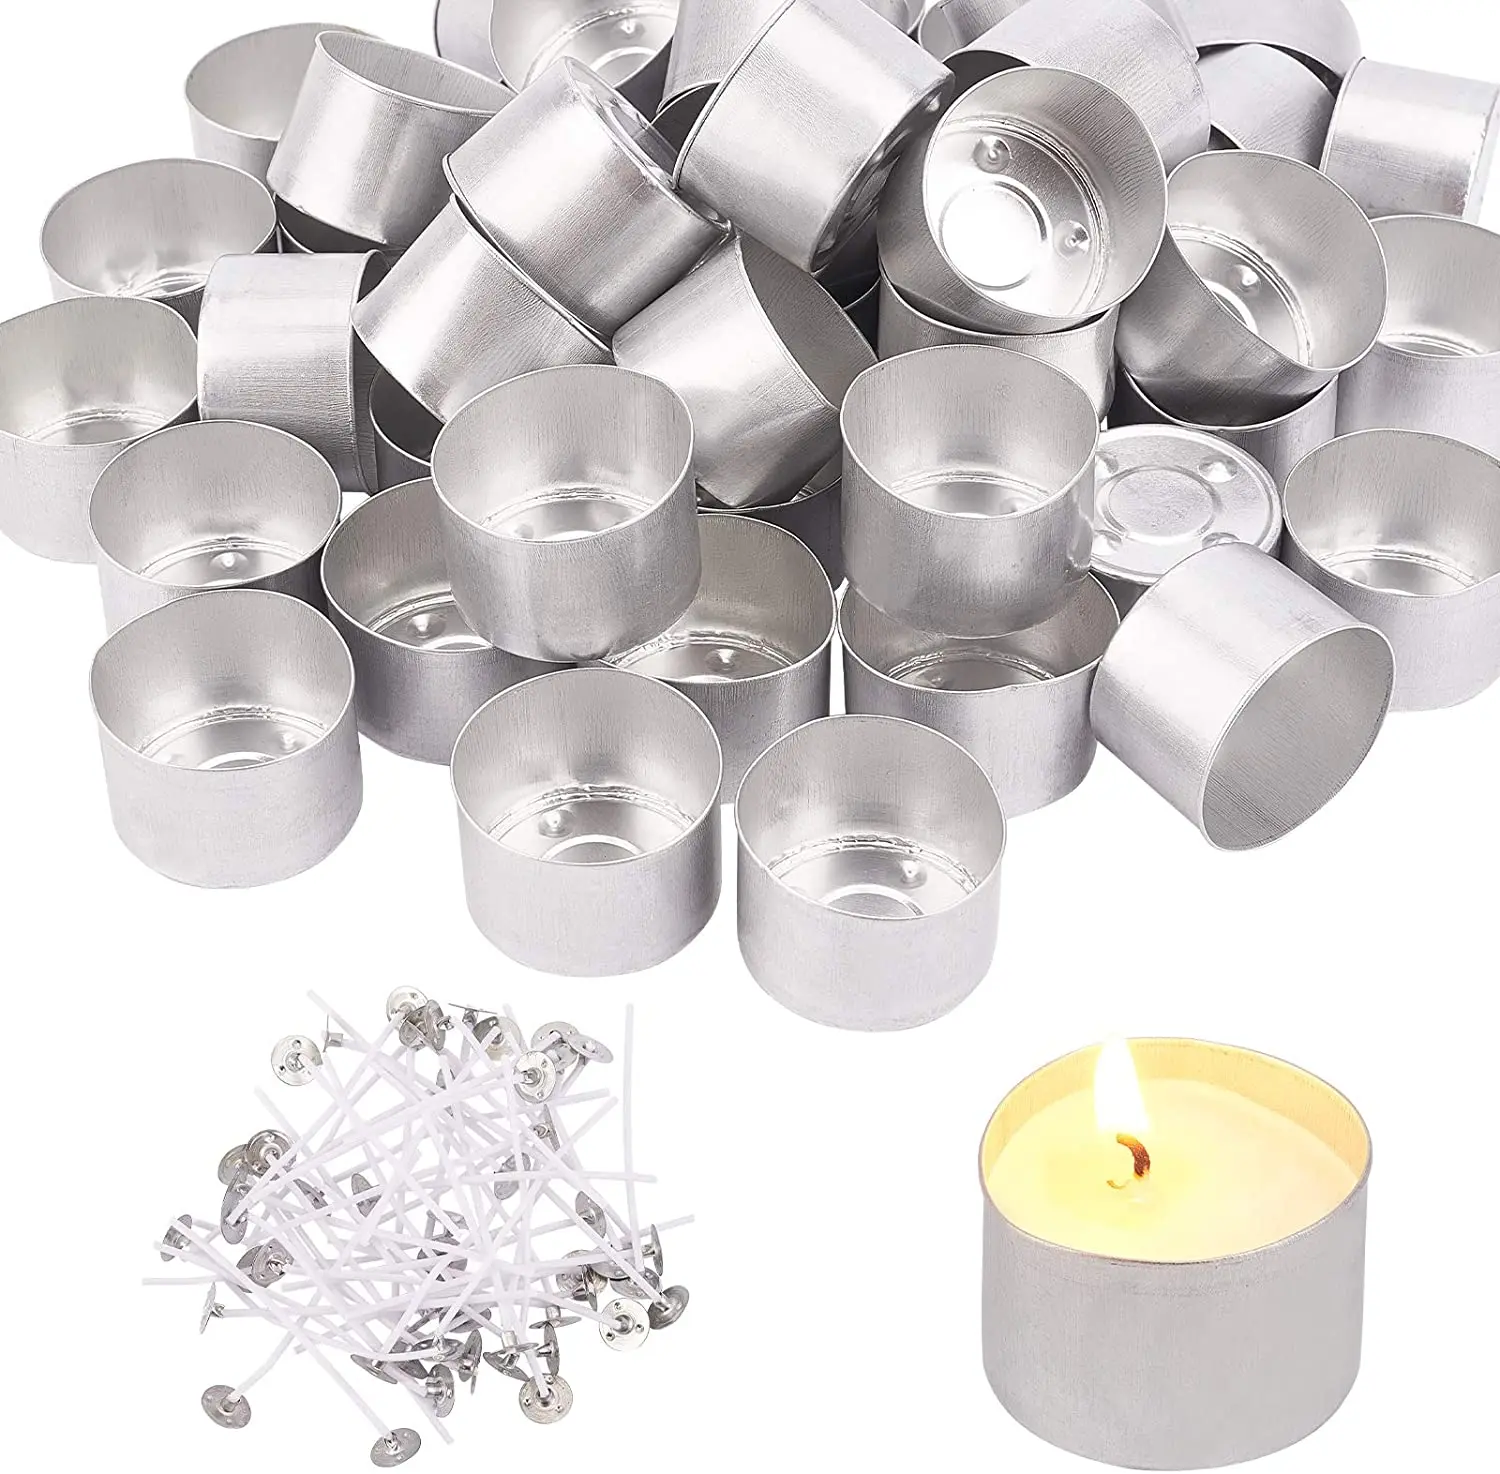 

M2191 Candle Mold Empty Aluminum Tealight Cups DIY Candles Tealight Containers Case Candle Making Mold Tools, White